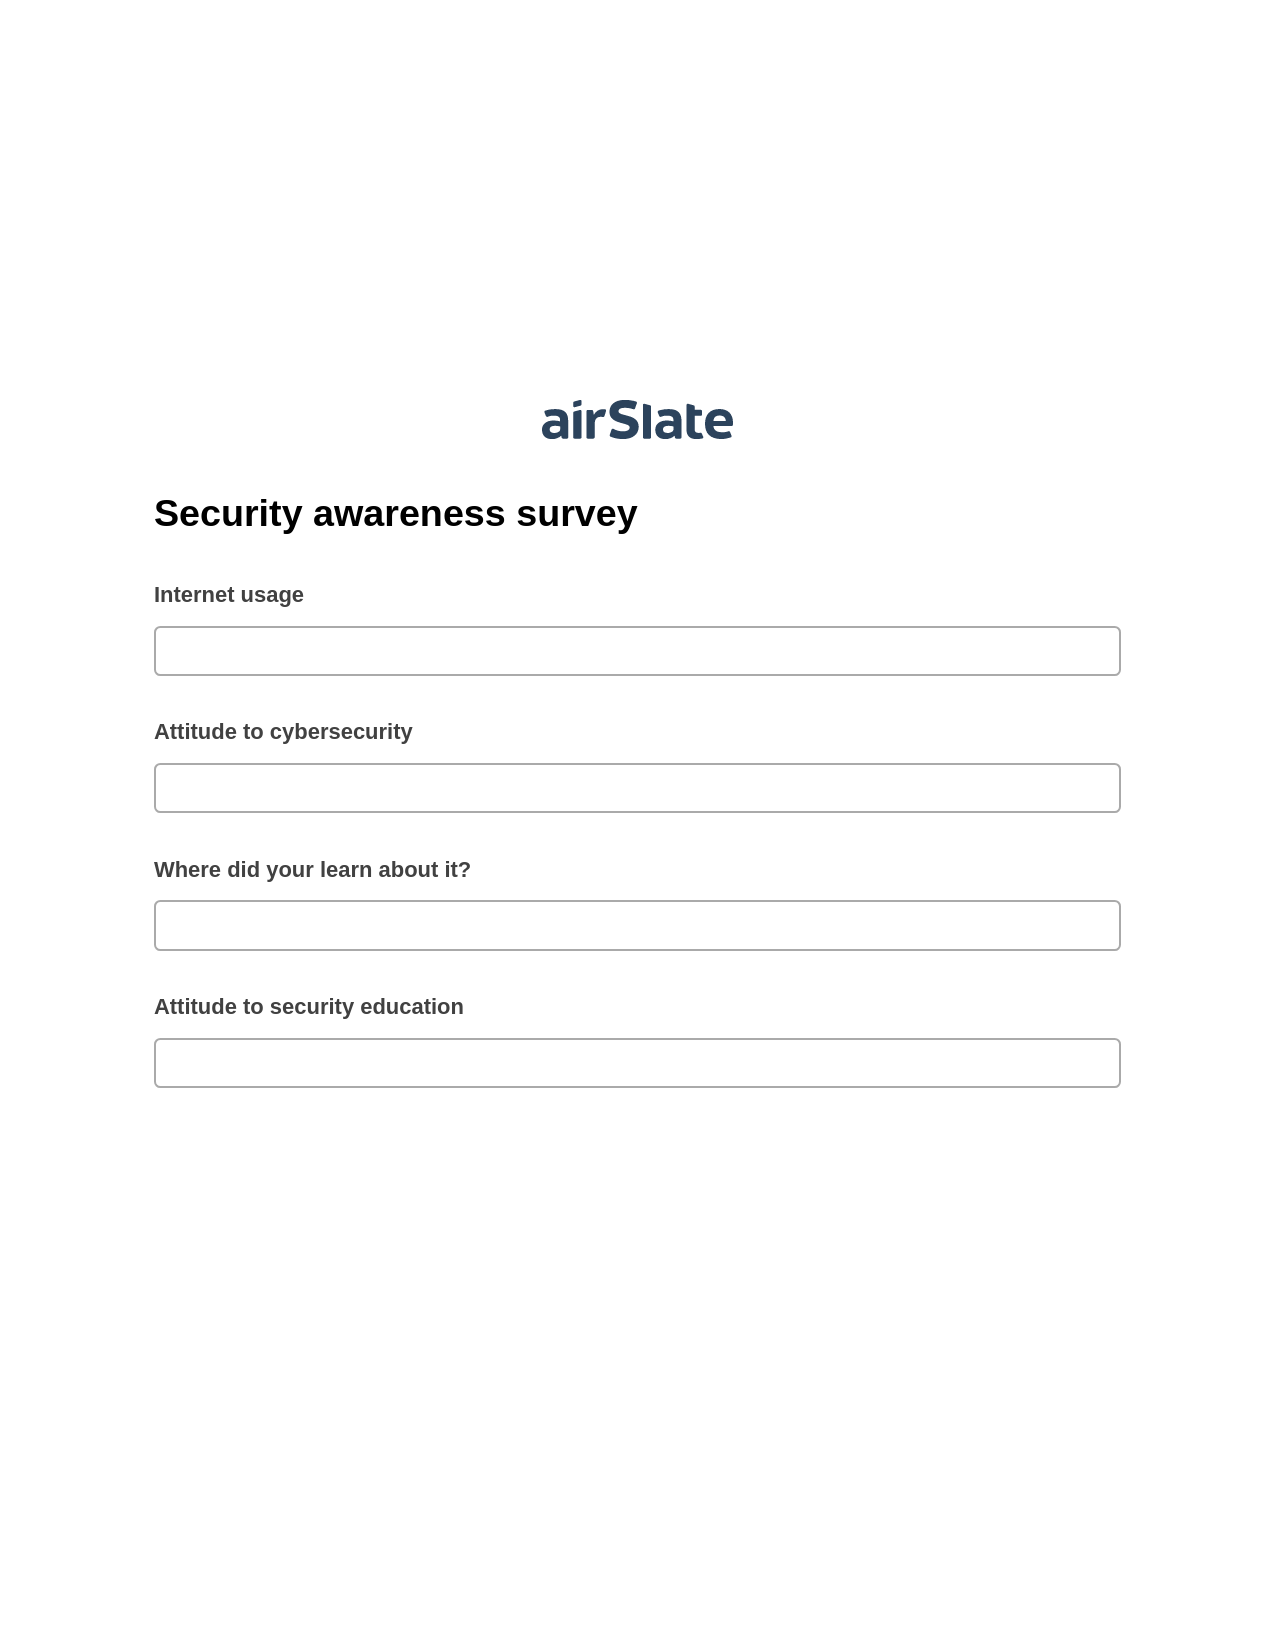 Security awareness survey Pre-fill Document Bot, Unassign Role Bot, Export to MySQL Bot